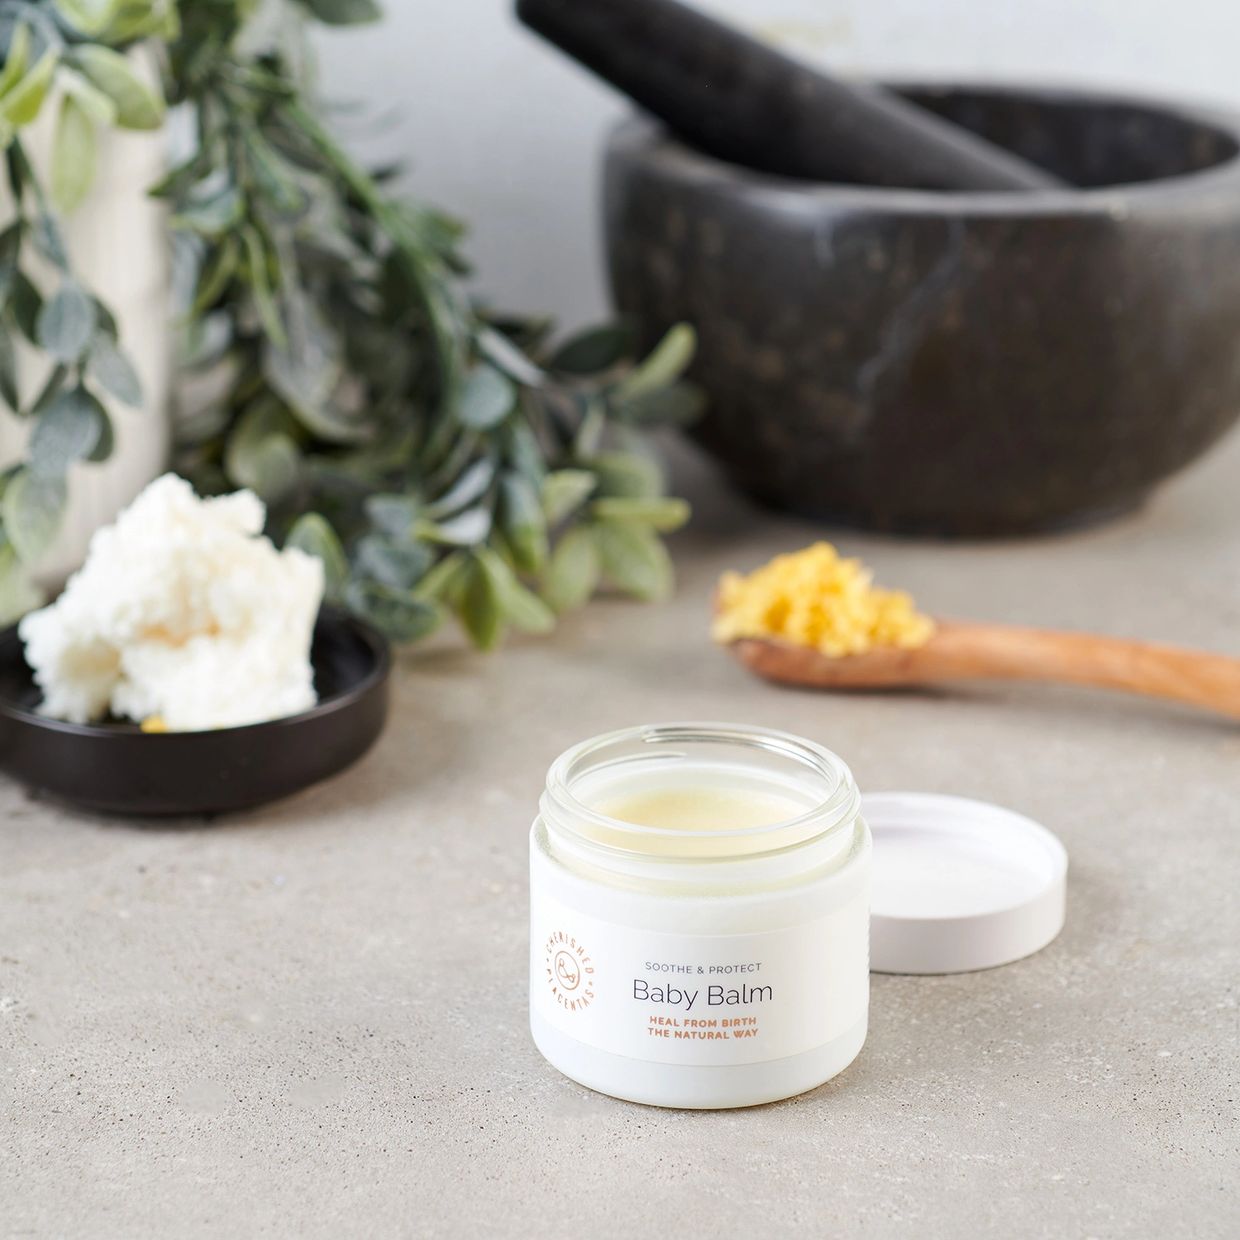 Organic mother and baby balm